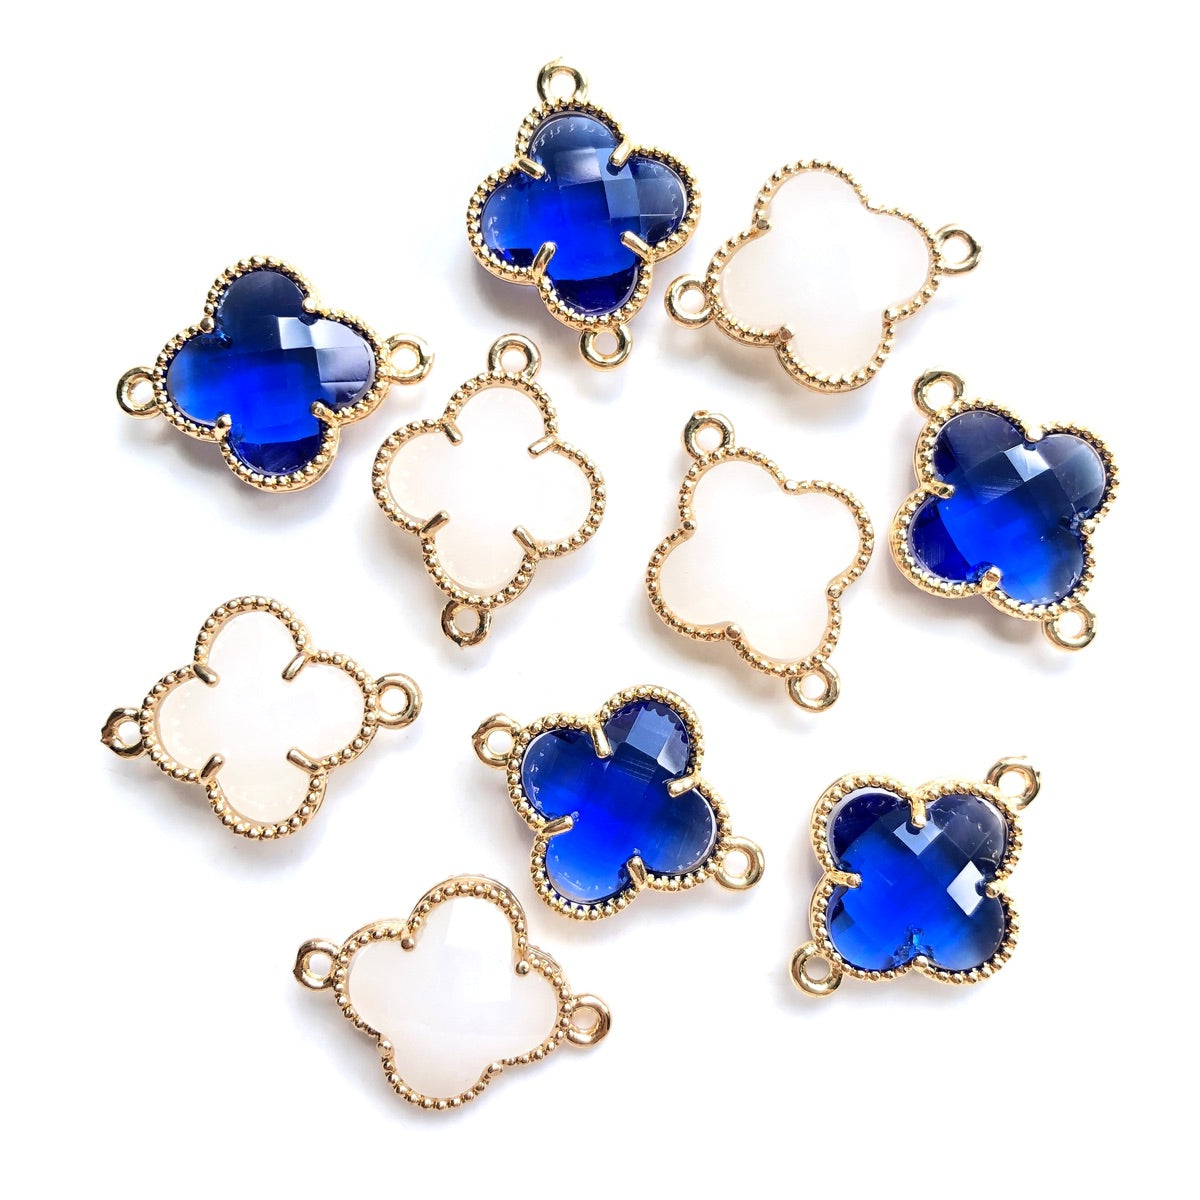 10pcs/Lot Gold Plated Glass Crystal Clover Flower Connectors Mix Blue White Stone Charms Flower Glass Beads New Charms Arrivals Charms Beads Beyond